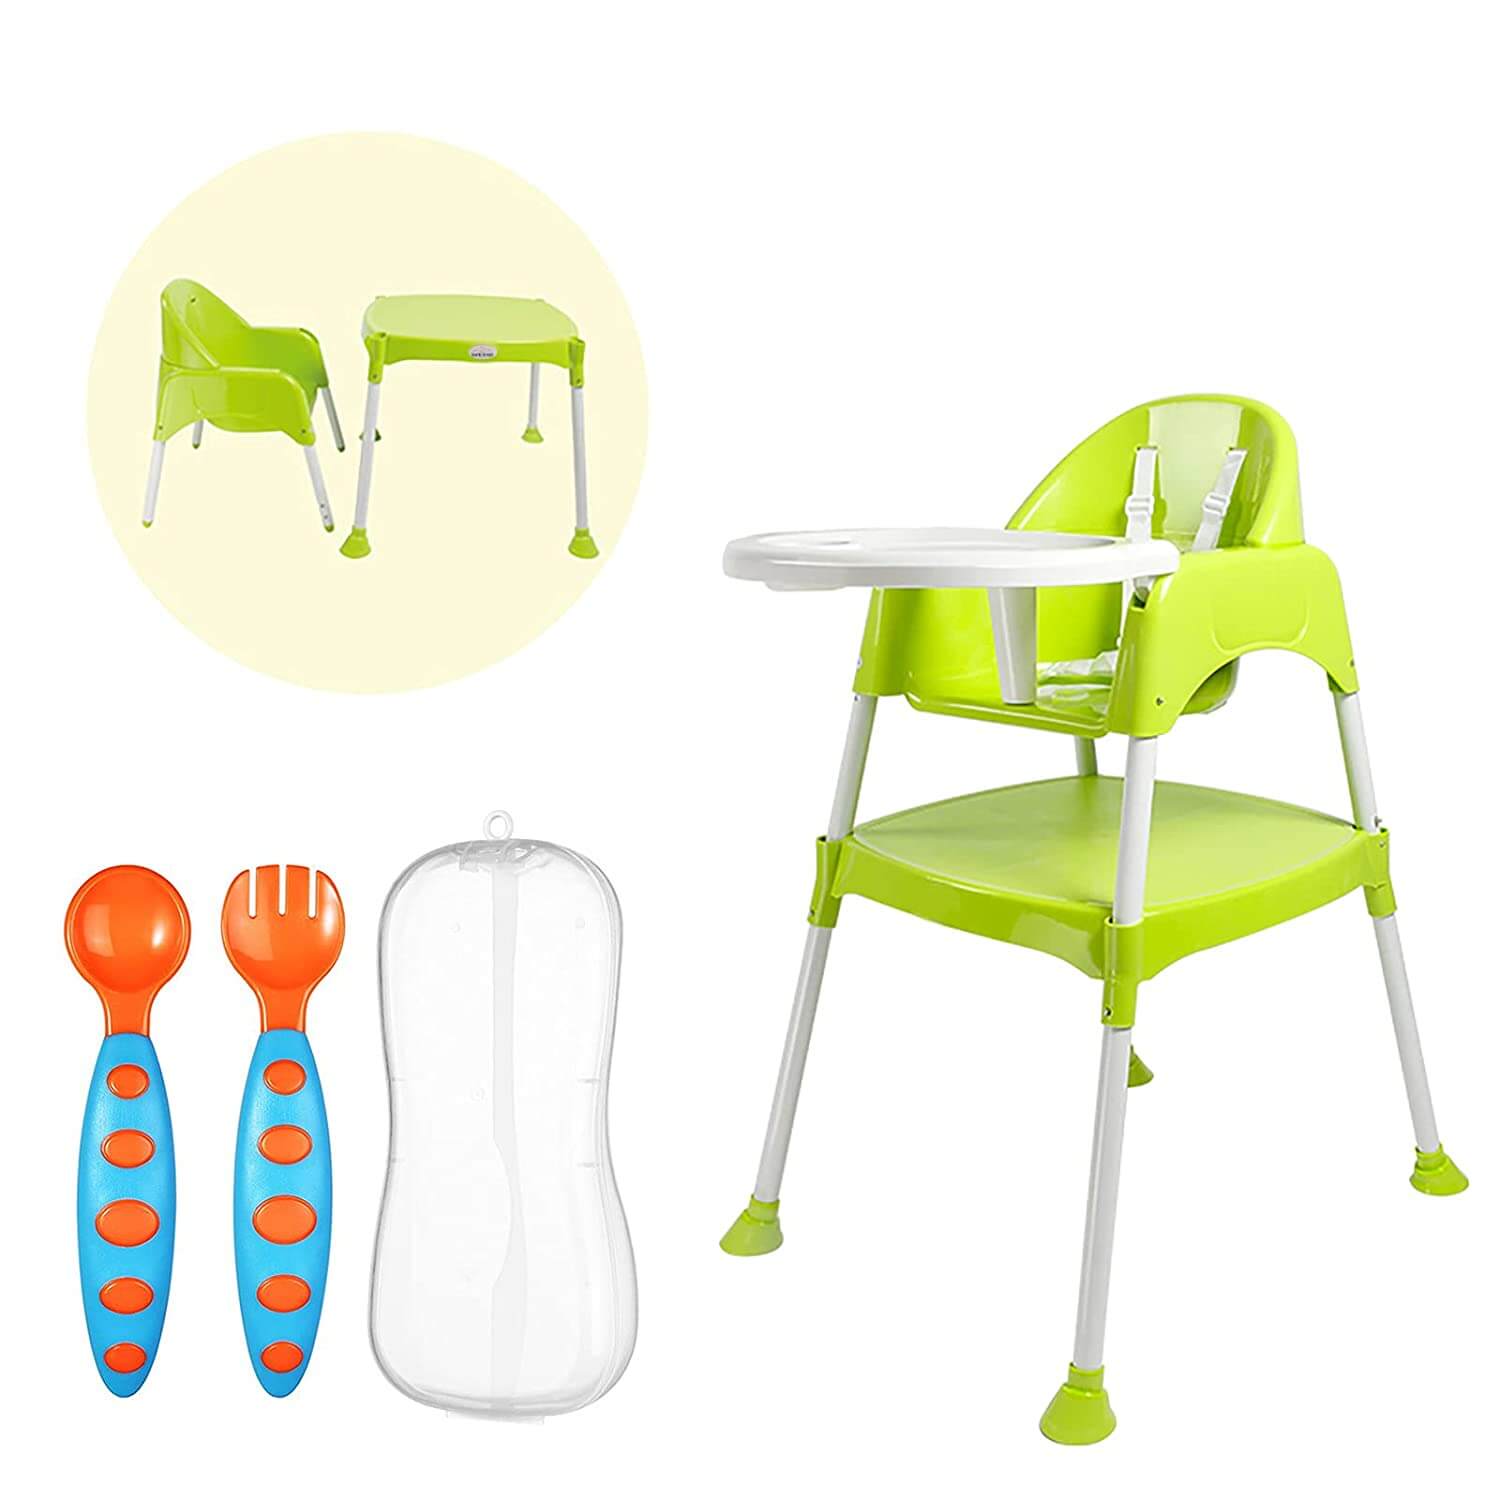 Safe-O-Kid 5 in 1 Feeding/High Chair for babies